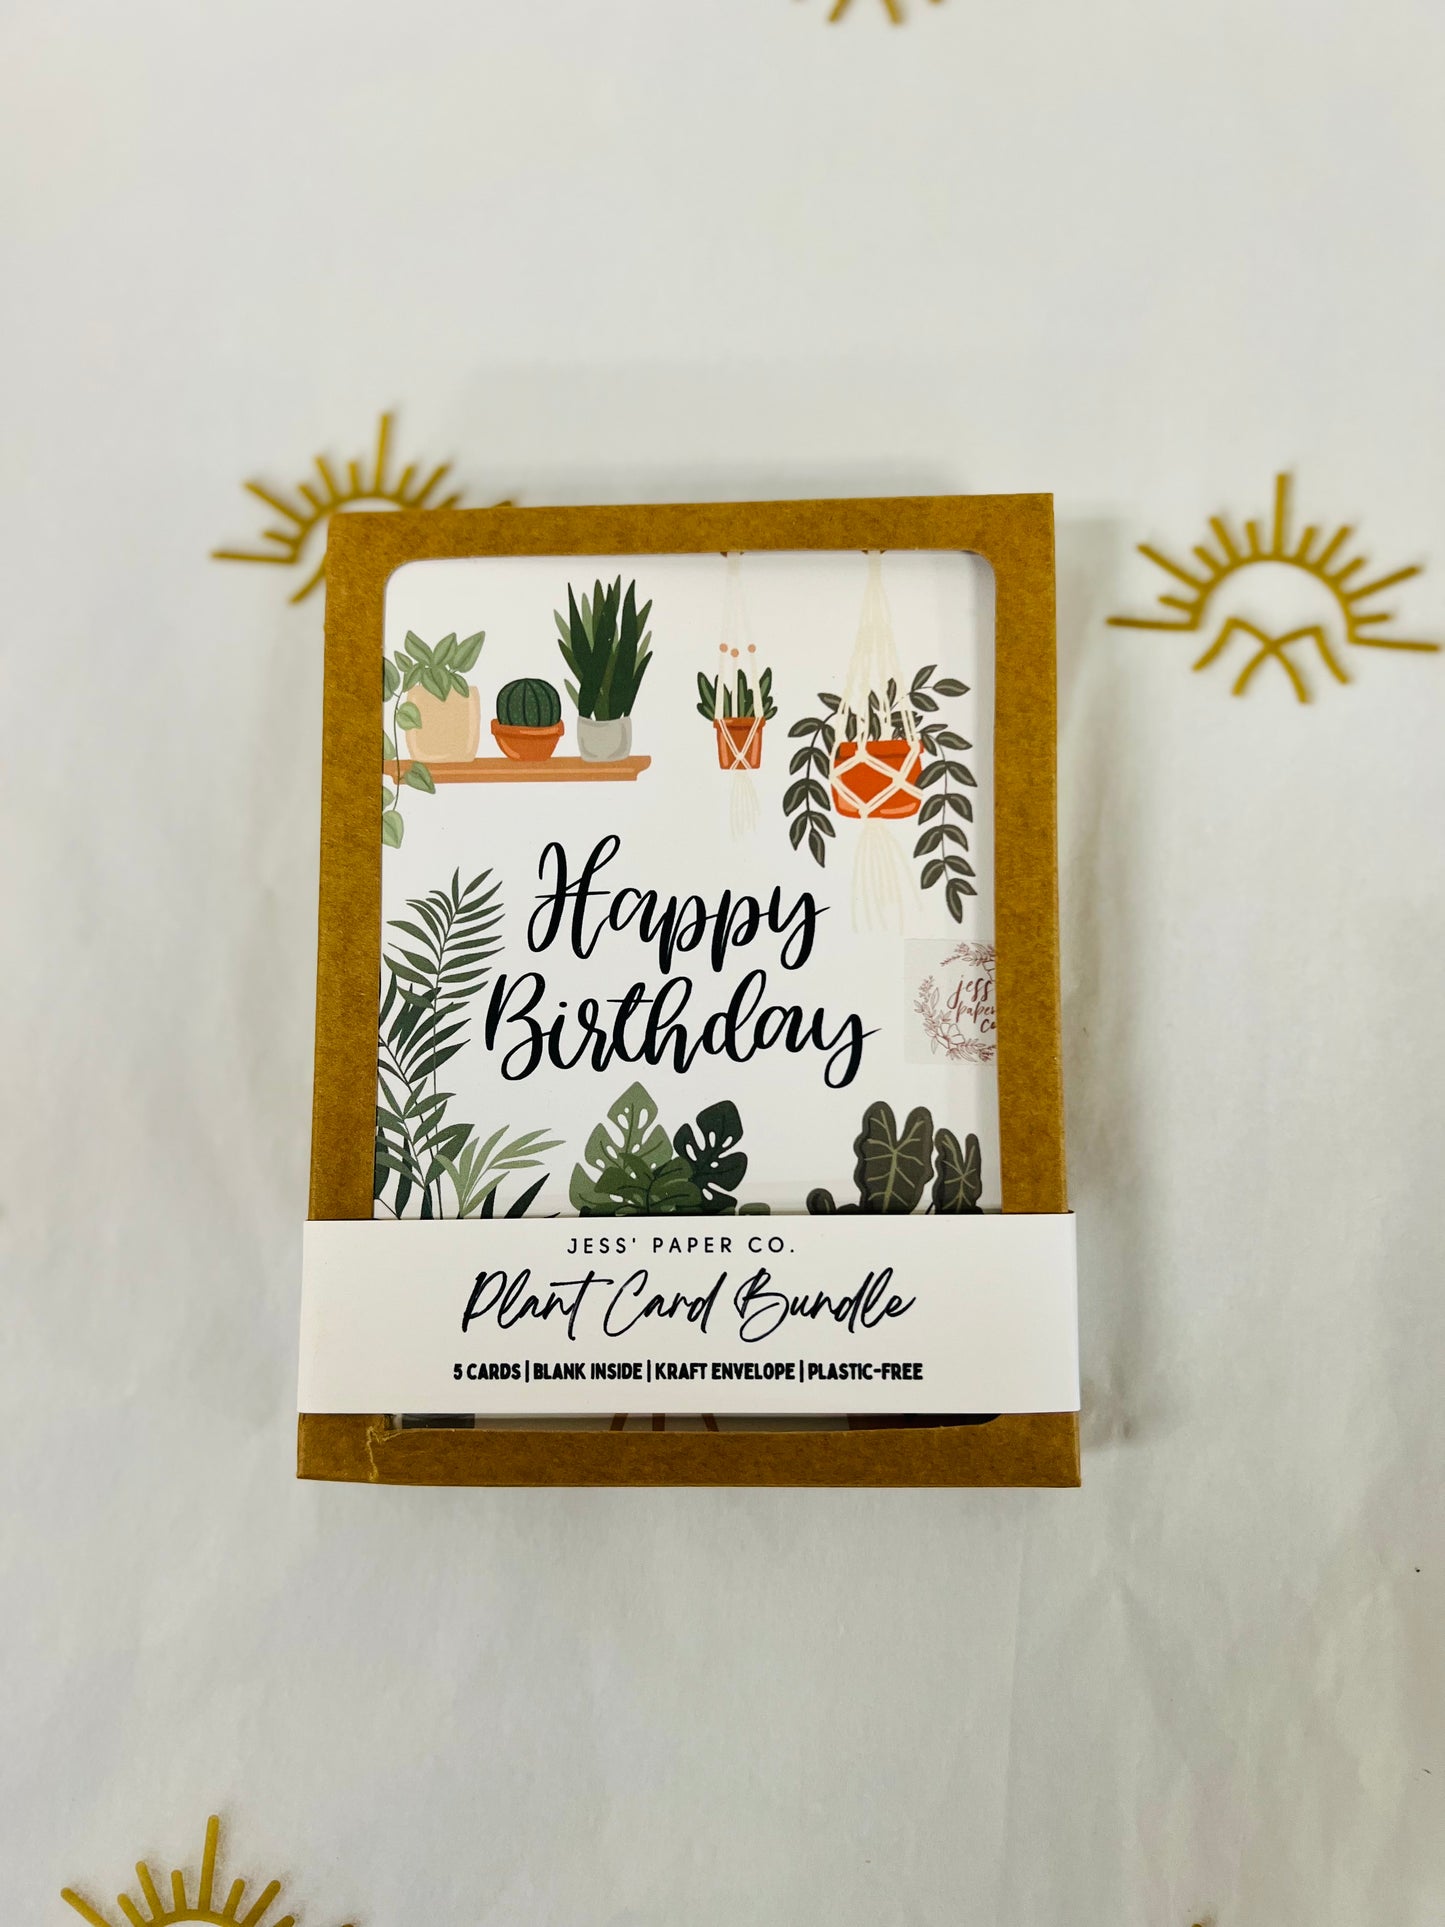 Plant Card Pack Home Goods Jess' Paper Co. Happy Birthday  